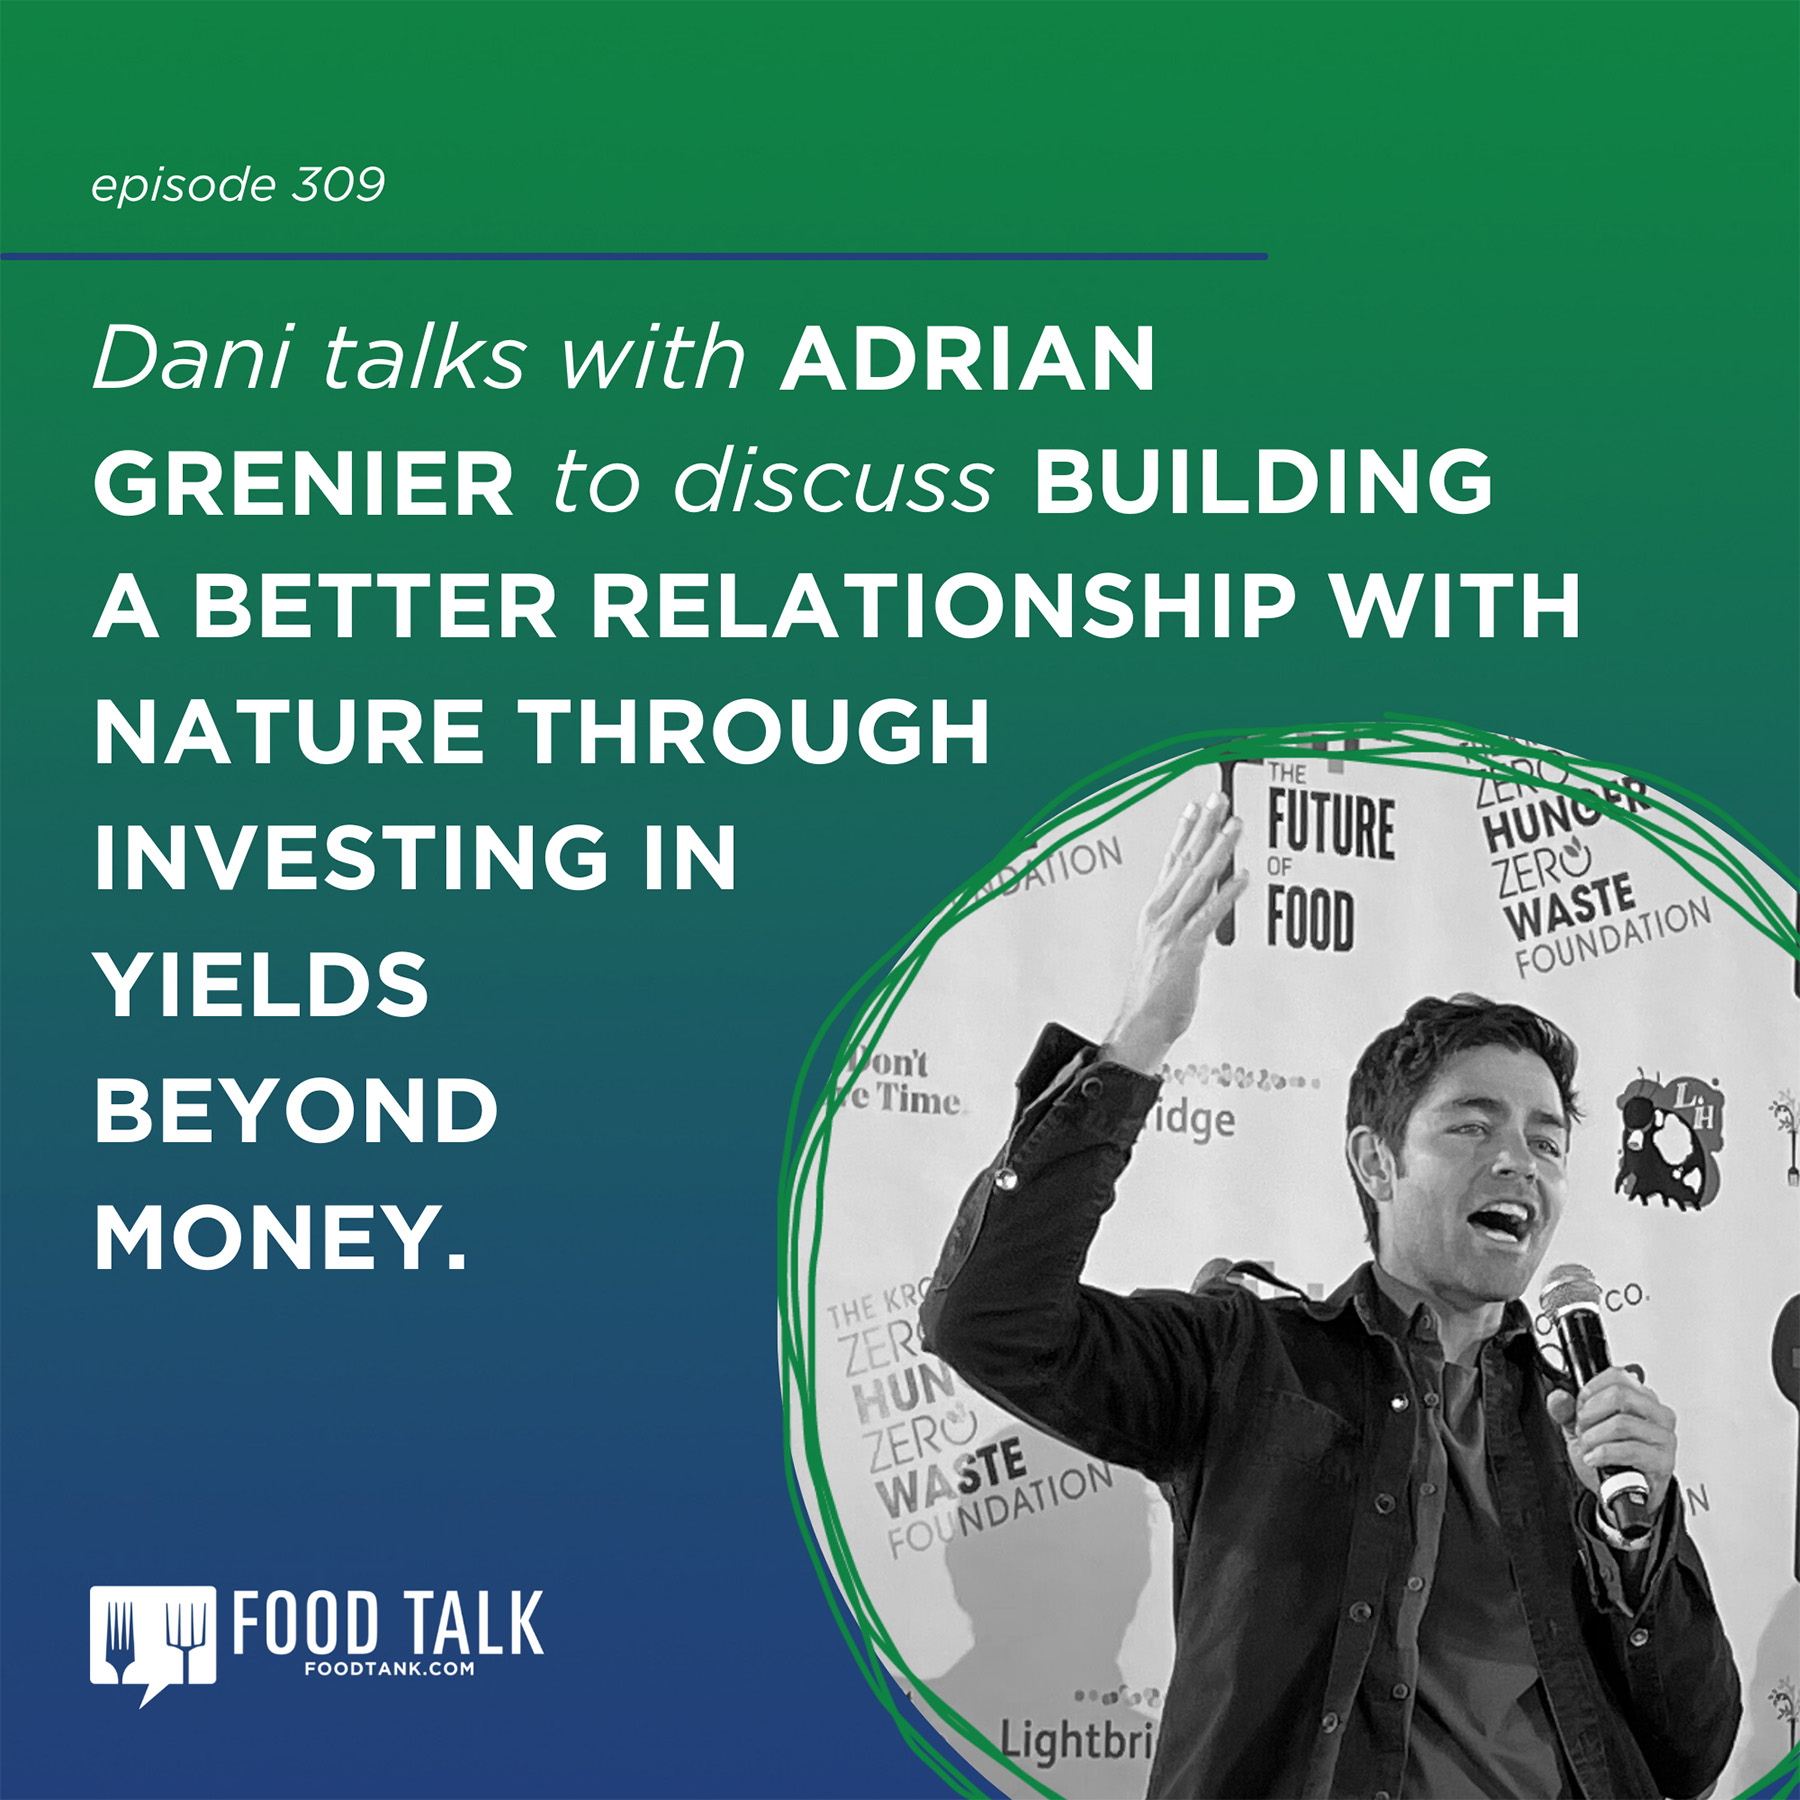 https://podcasts.apple.com/us/podcast/309-future-of-food-with-adrian-grenier-live-at-sxsw/id1434128568?i=1000554175524